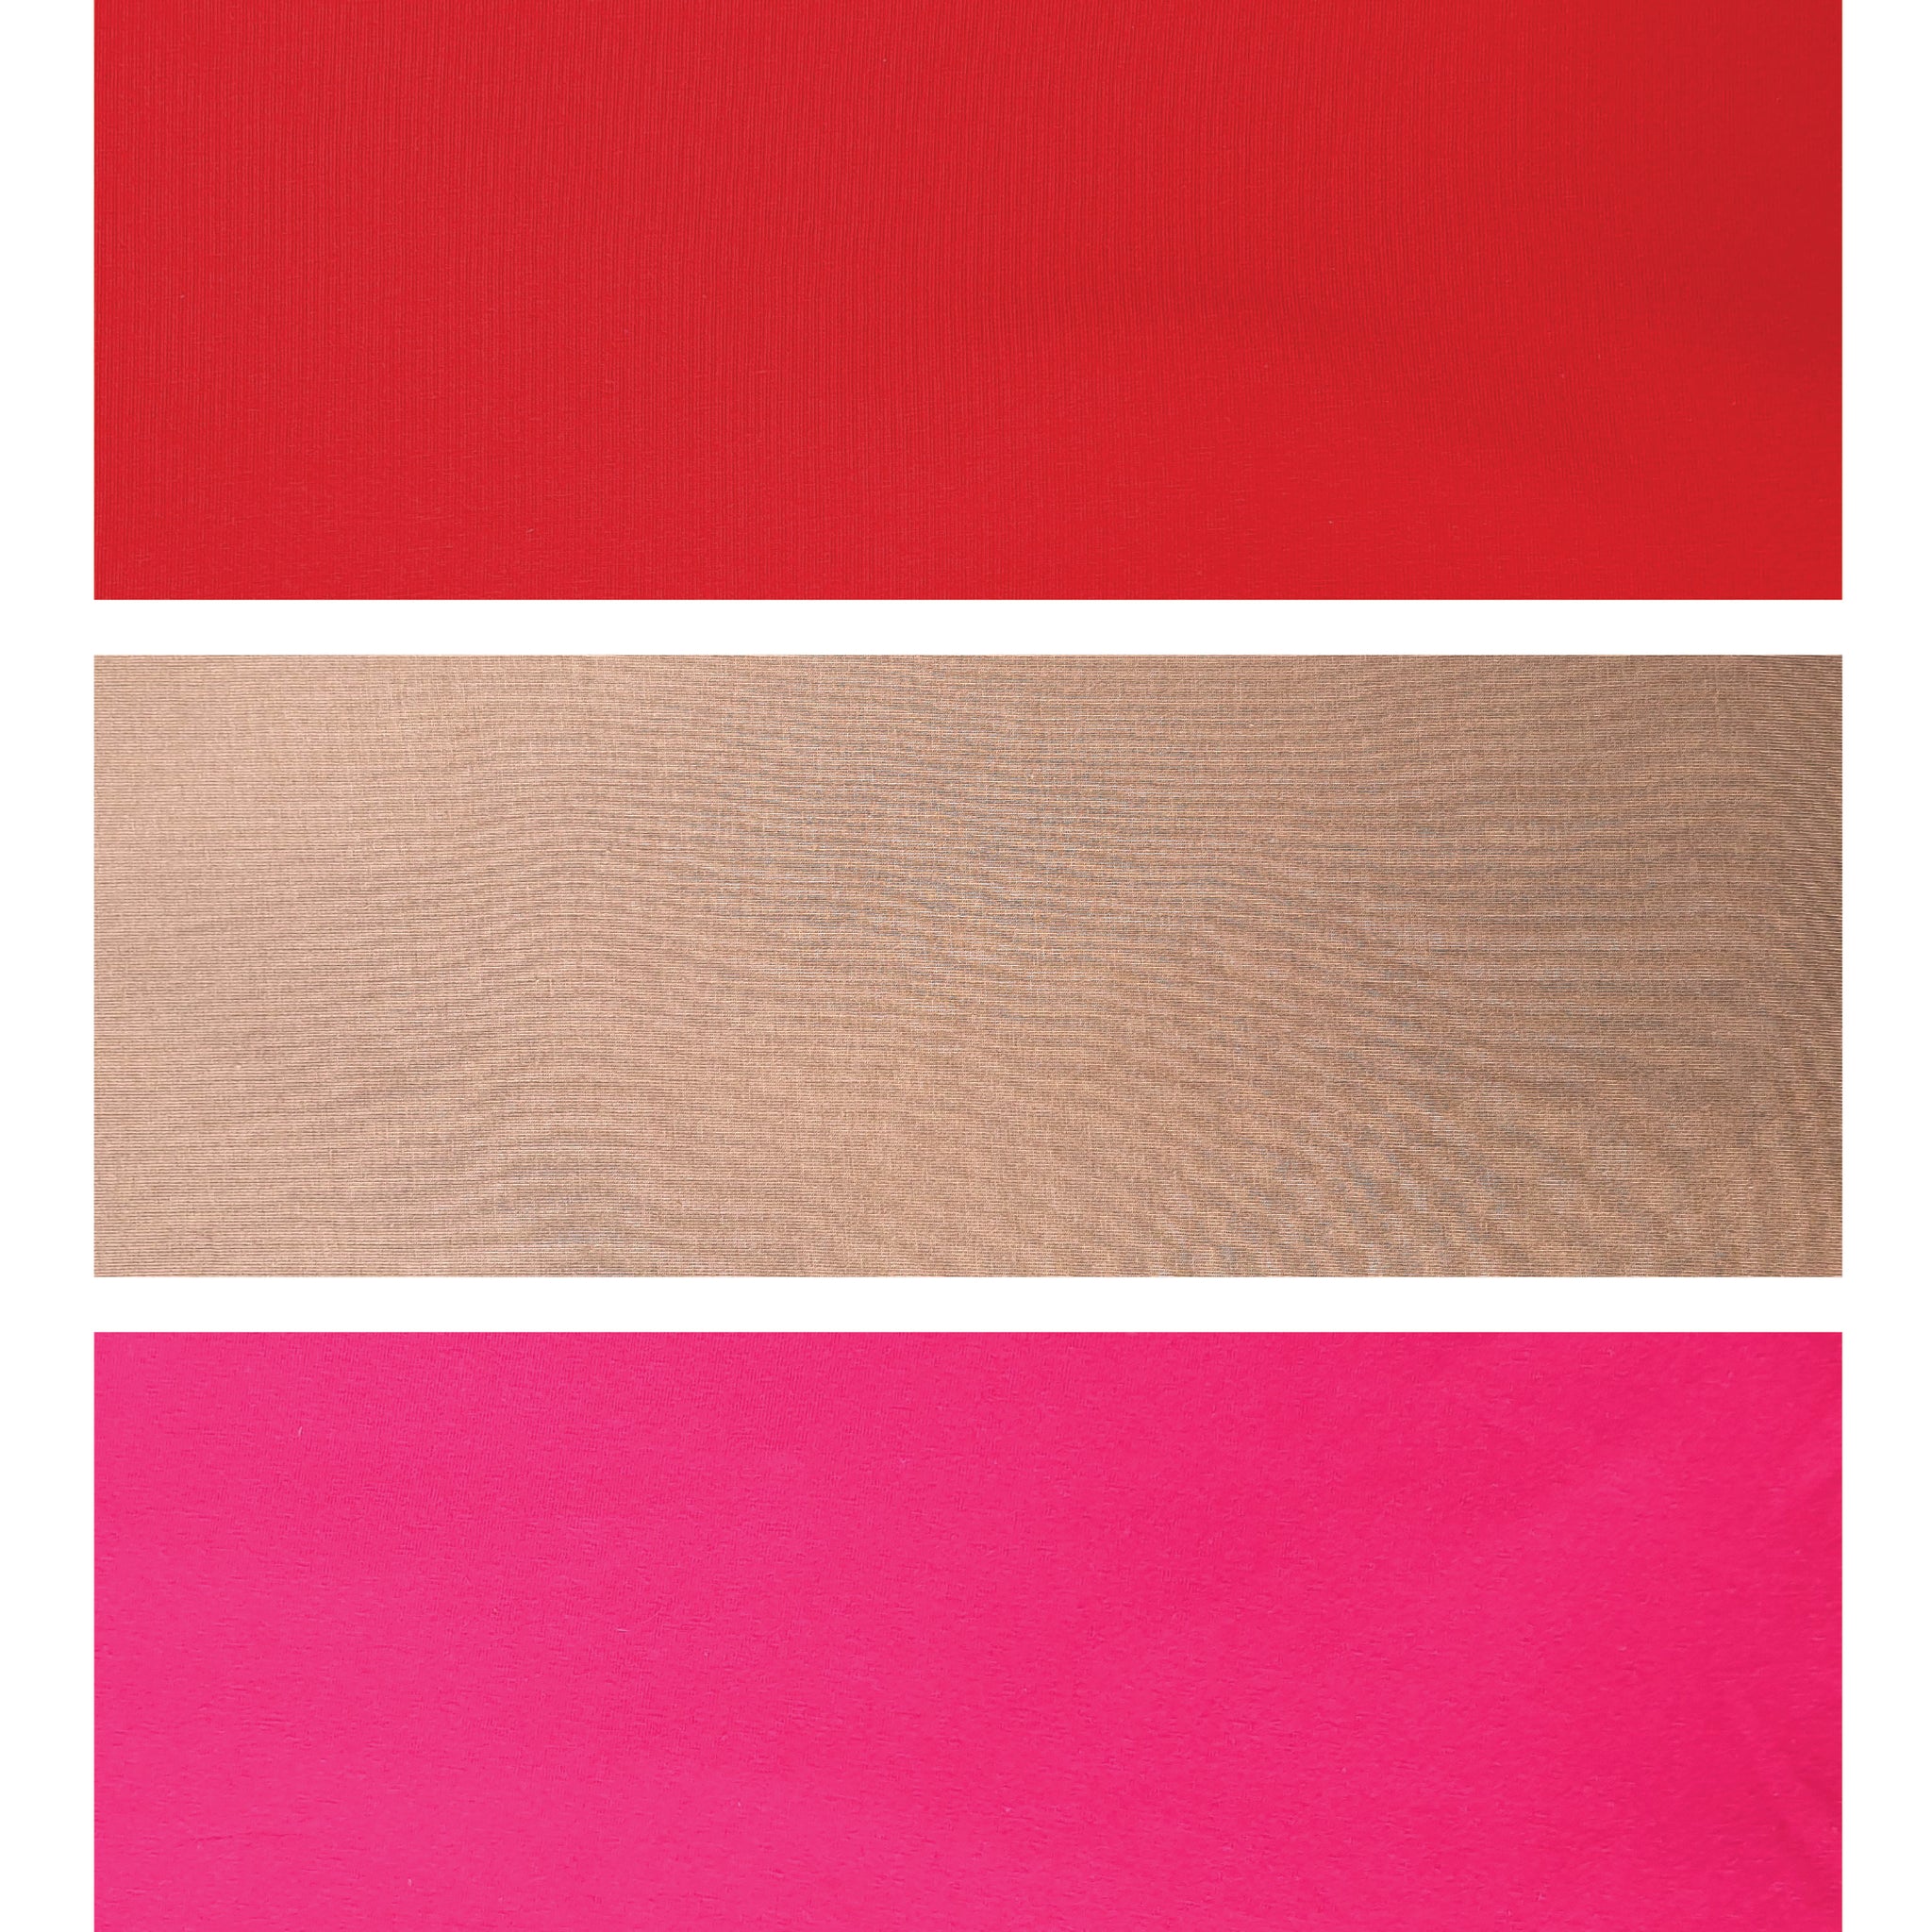 Low Waist Panty (PO3)-Combo-1(Apple Red, Ginger, Strawberry)